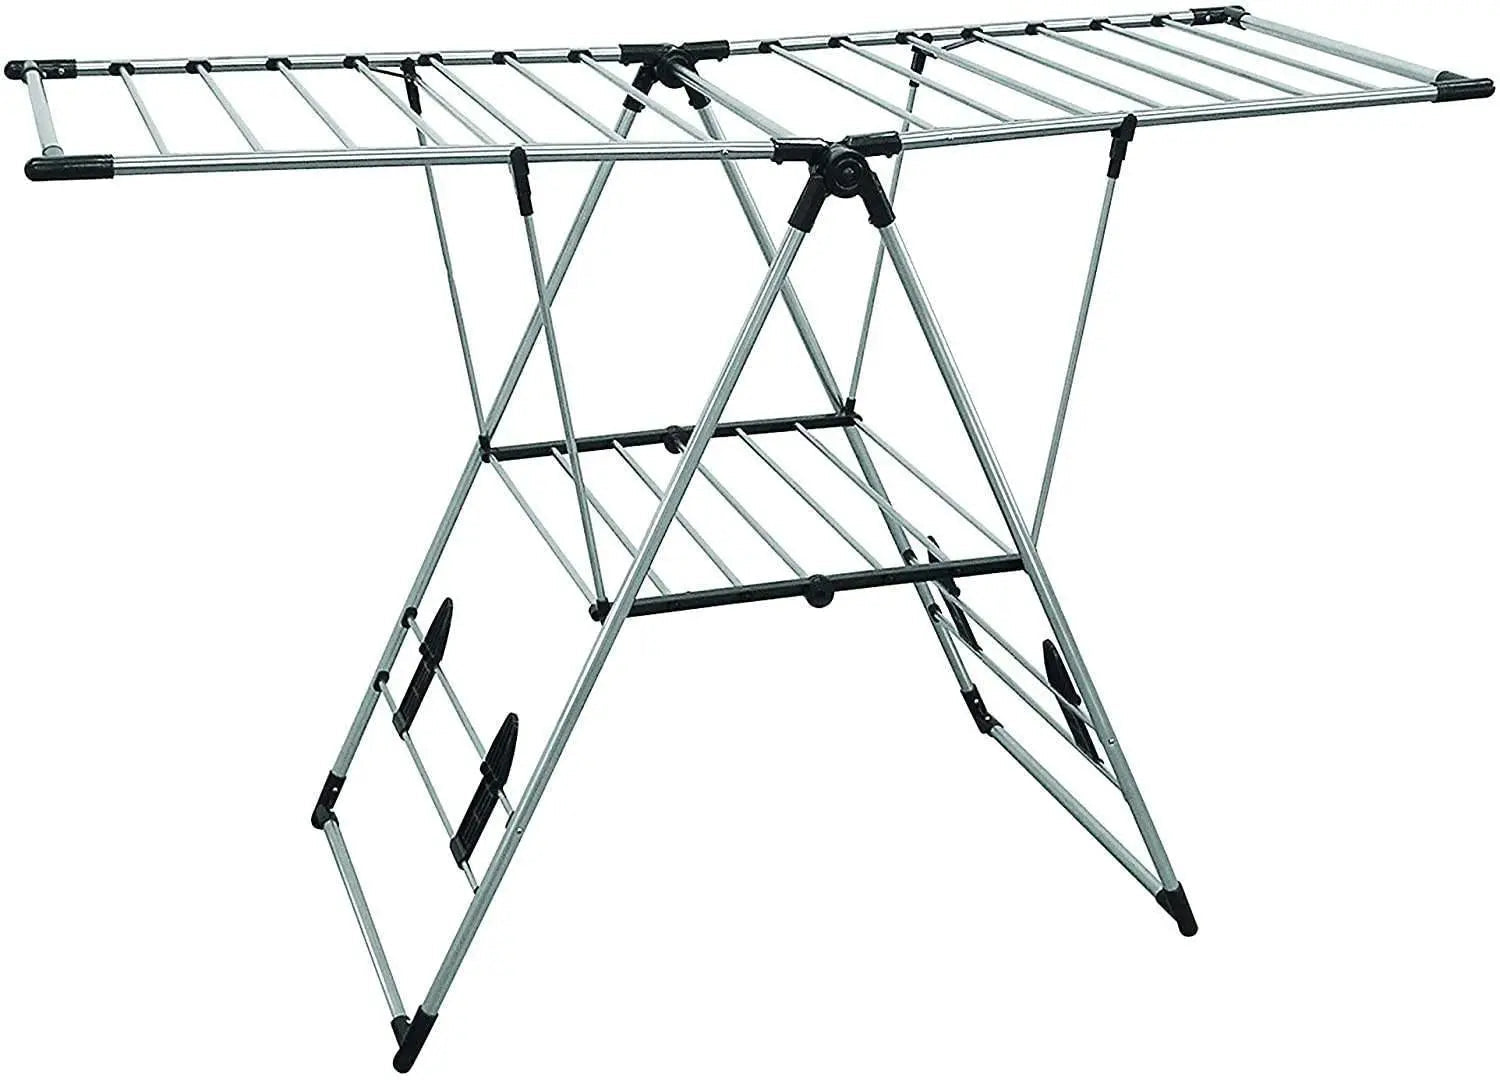 Wholesale prices with free shipping all over United States Greenway GFR0501SS Extra Large Fold Away Laundry Rack - Steven Deals